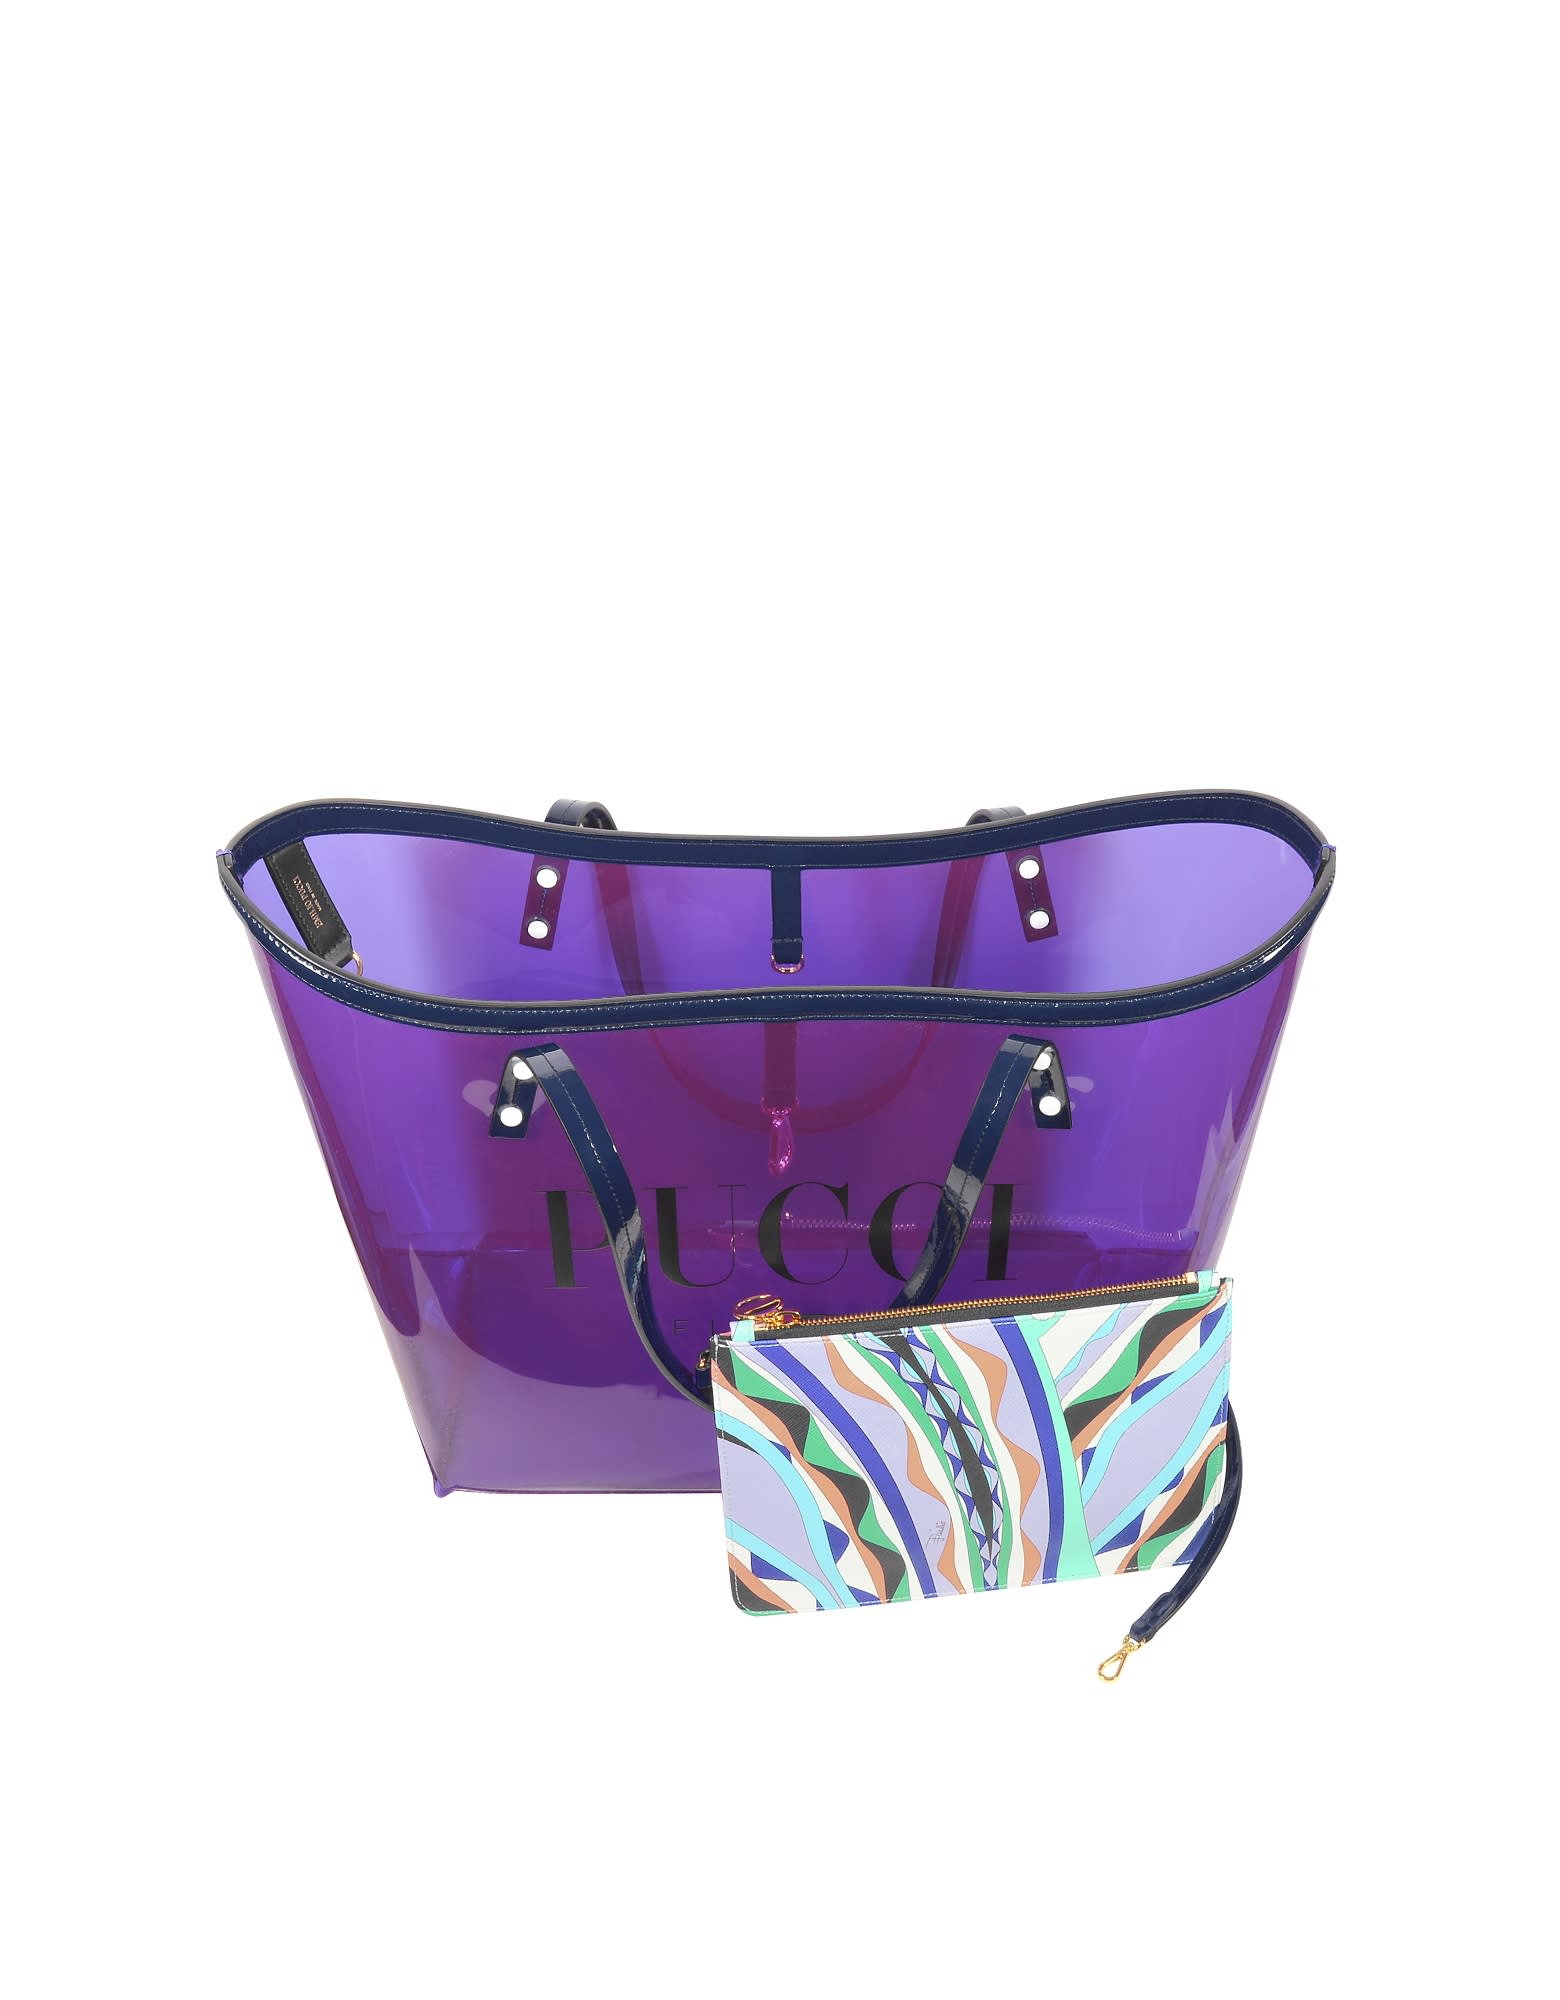 Emilio Pucci Tote Bag Top Sellers, UP TO 62% OFF | www.bravoplaya.com